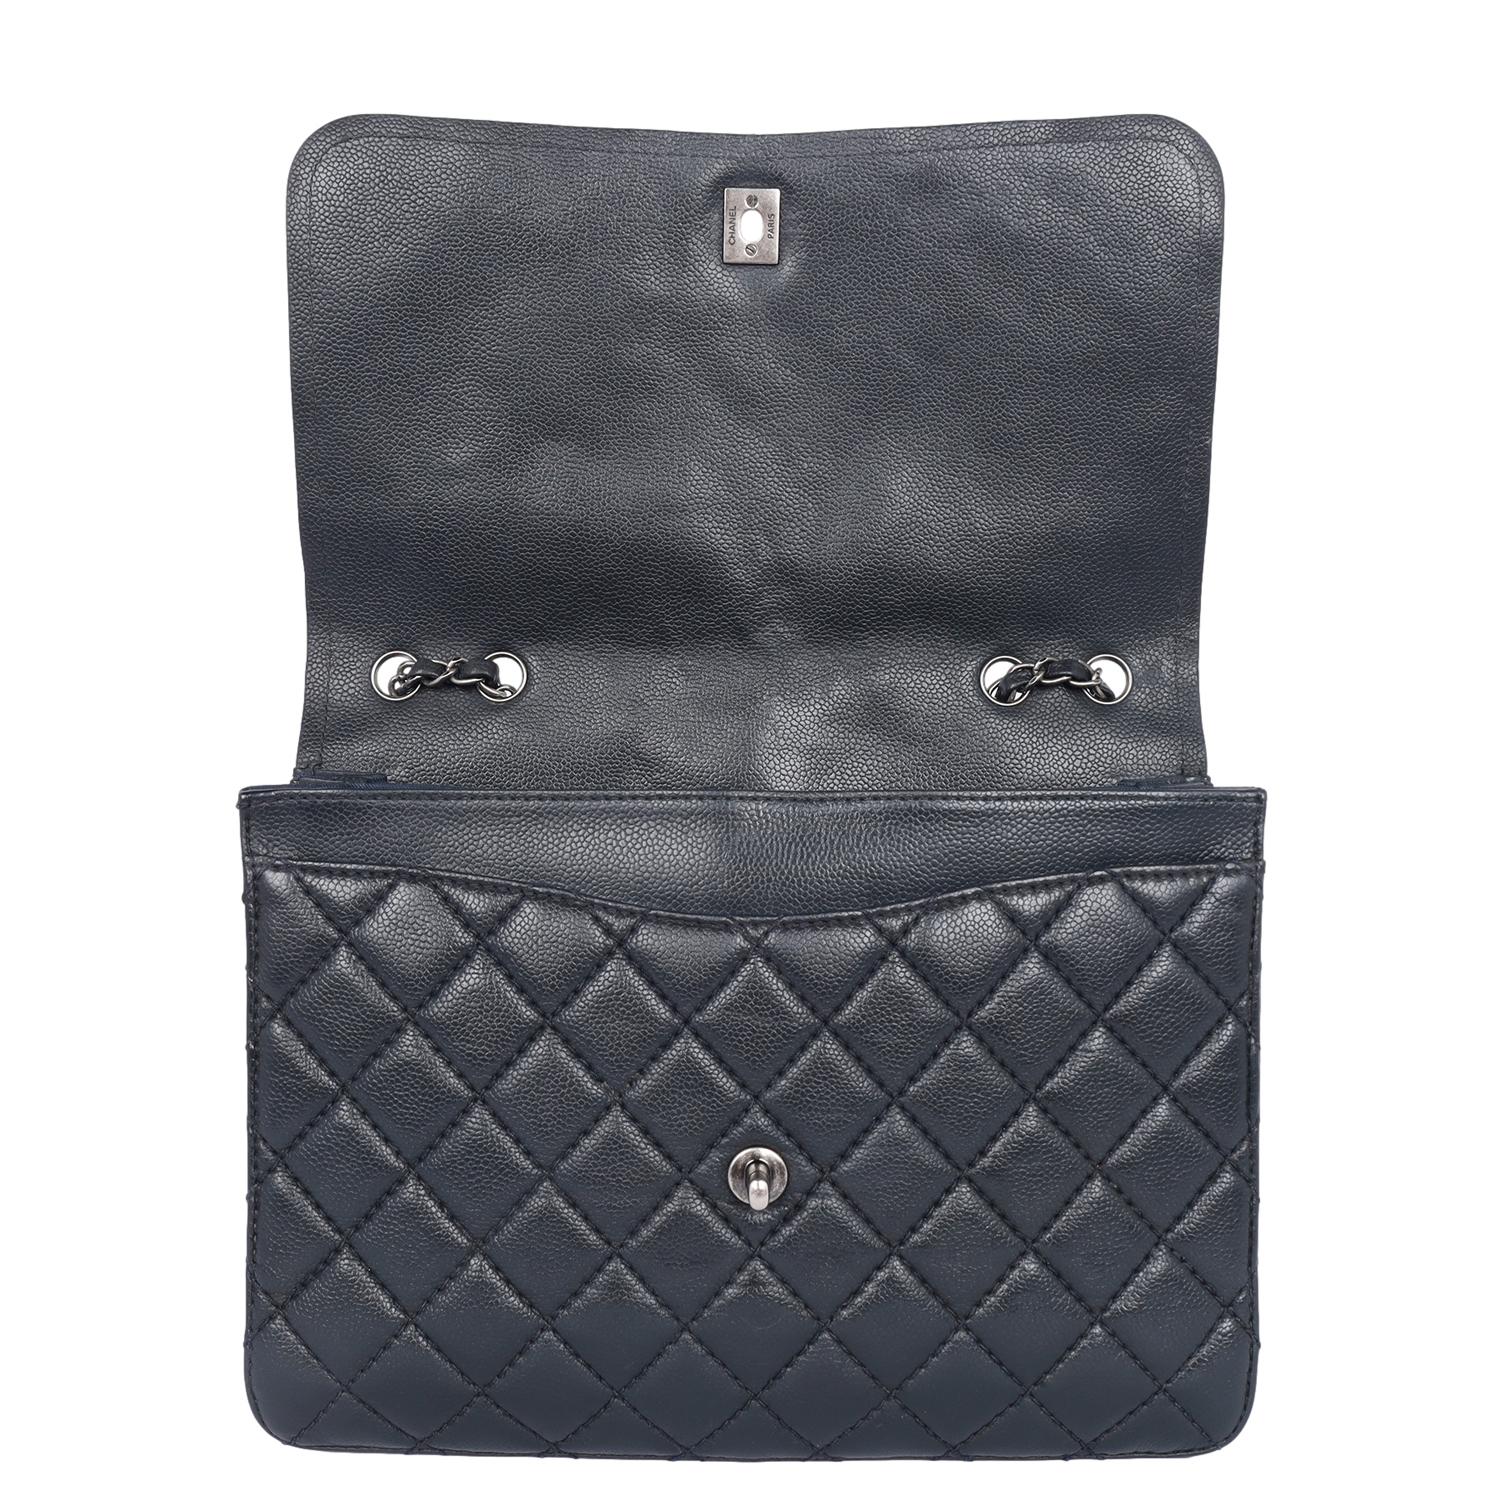 Chanel Quilted Matelasse CC Logo Caviar Leather For Sale 5